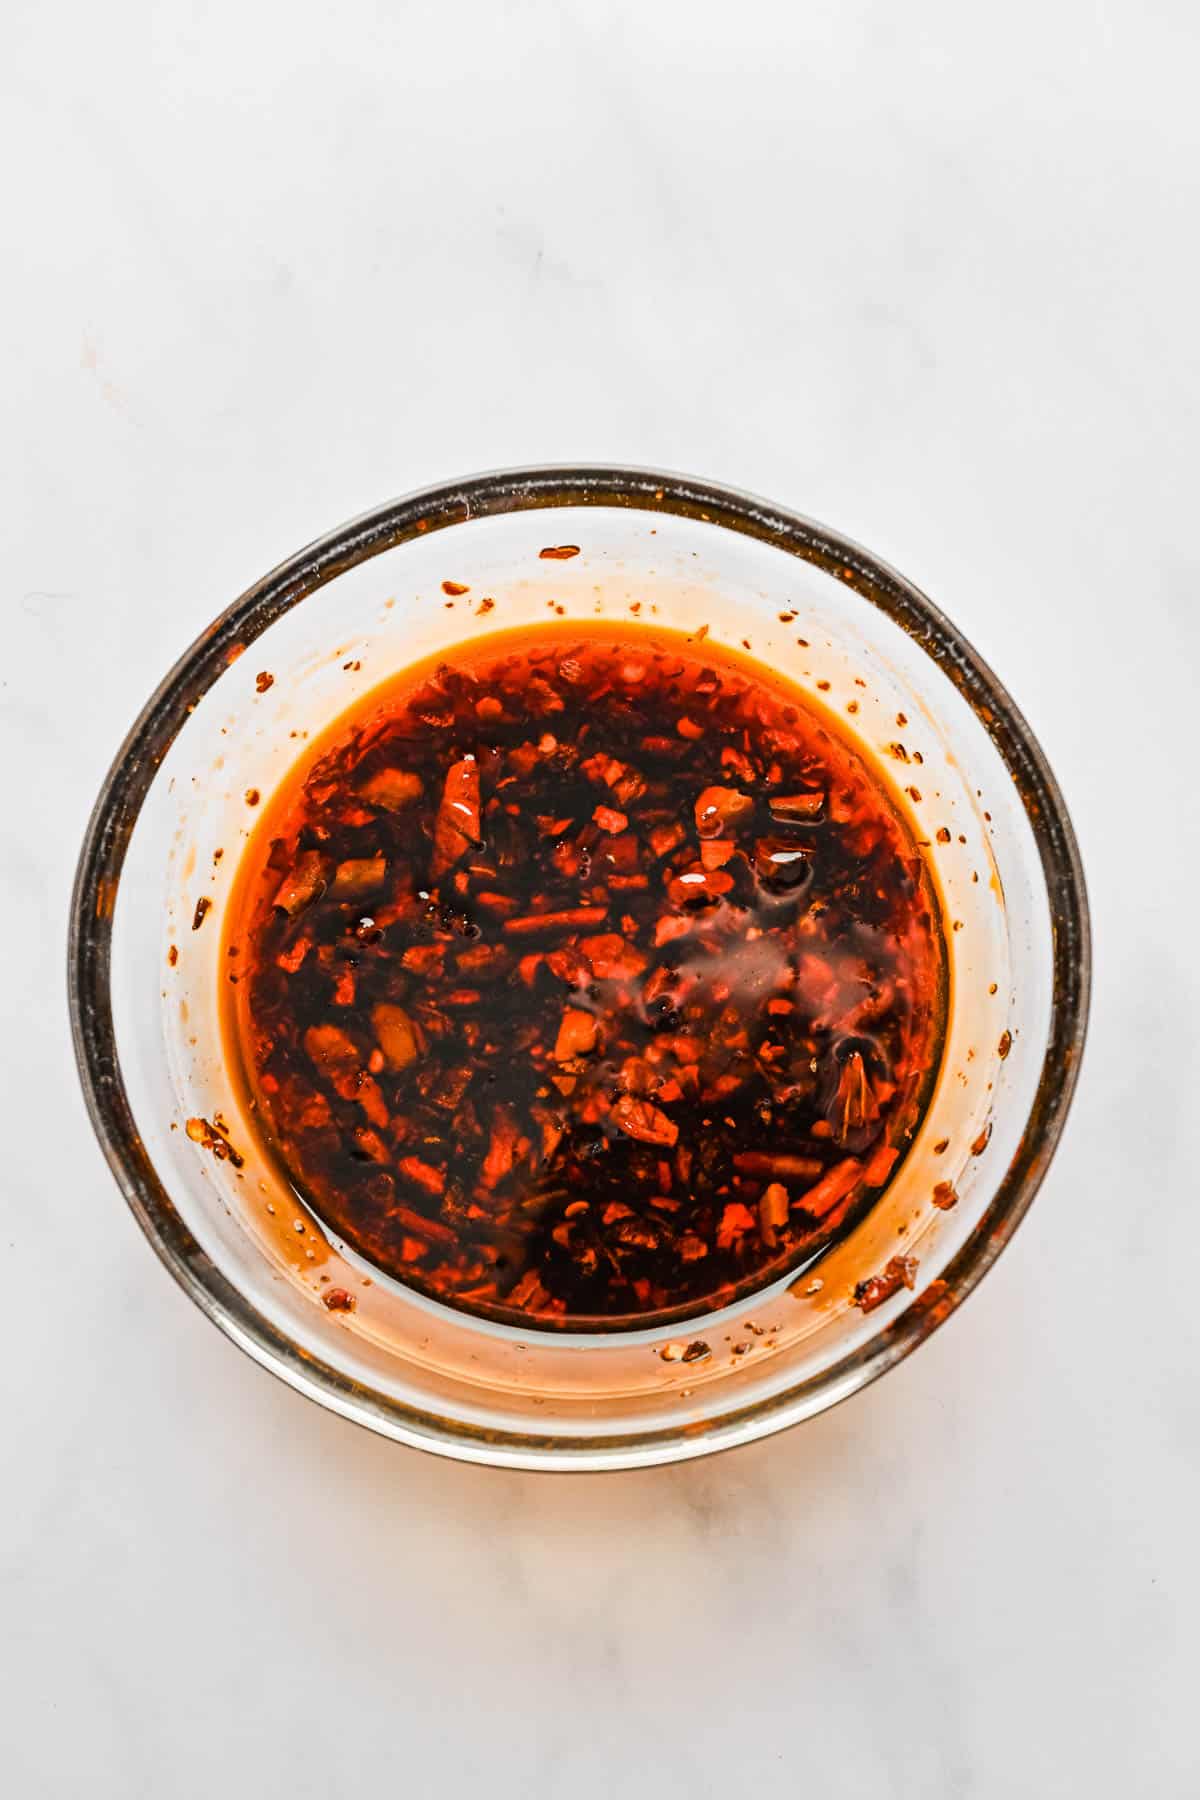 Chili sauce in a glass bowl.